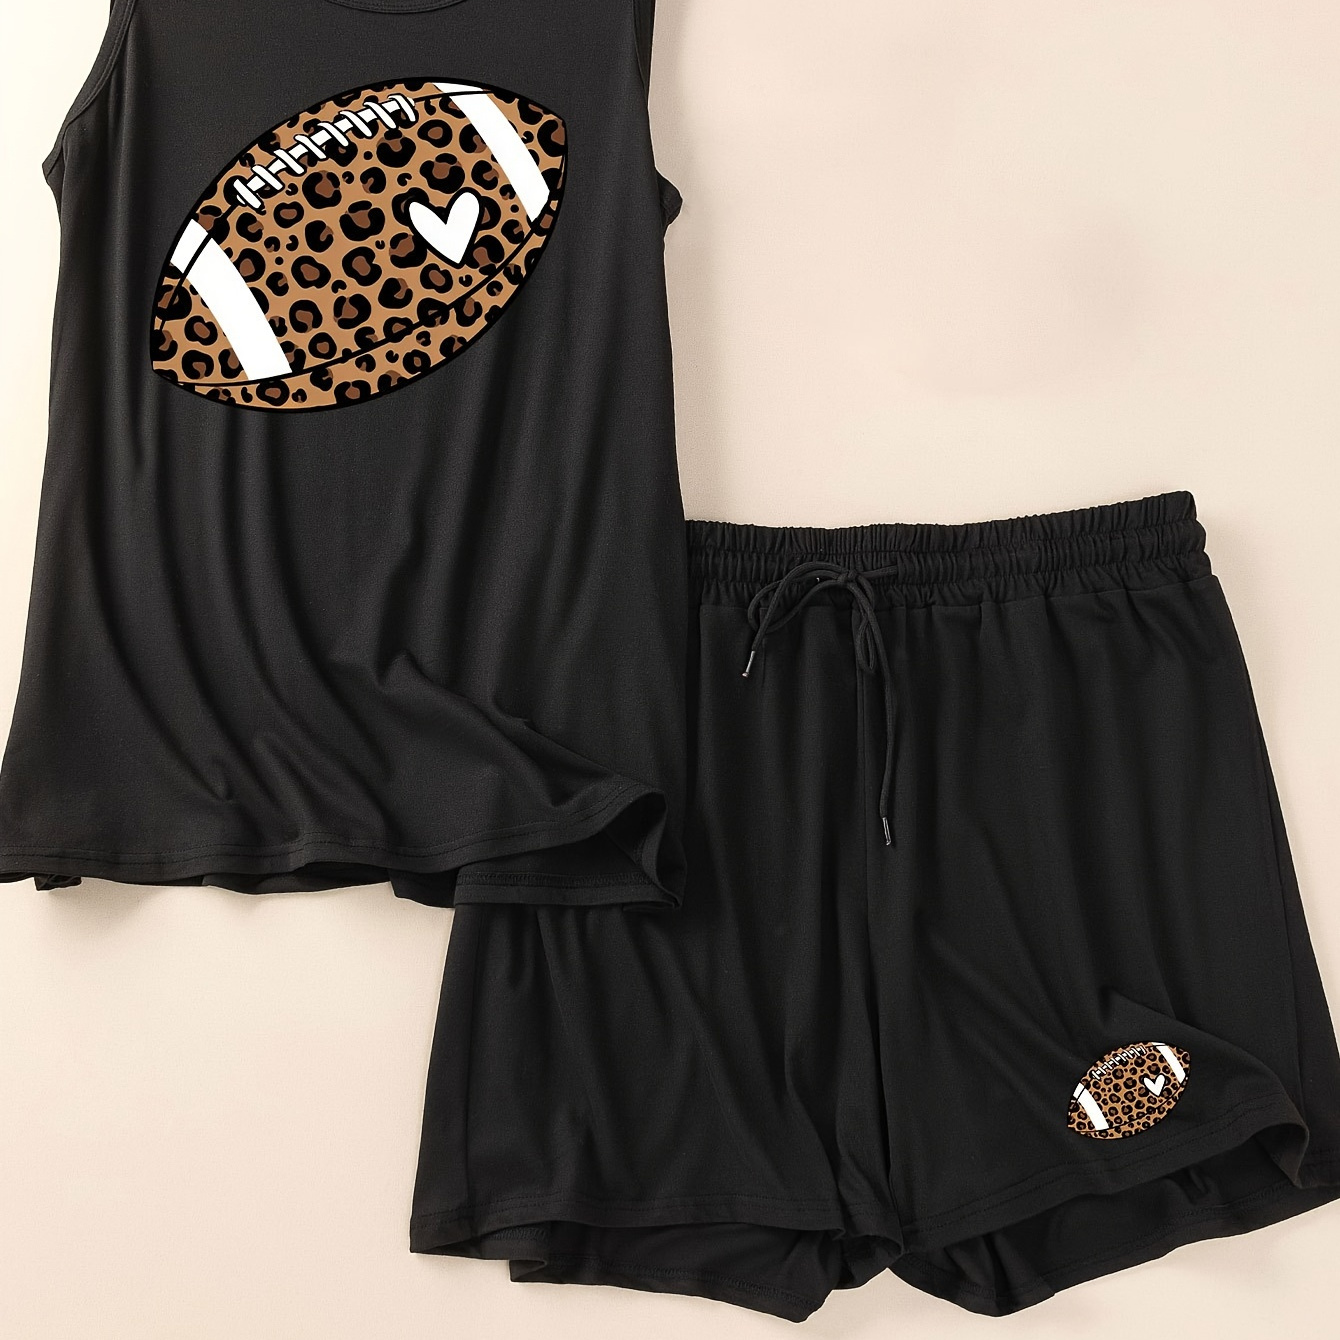 

Women's Superbowl Casual Lounge Set, Plus Size Leopard Rugby Graphic Round Neck Tank Top & Shorts Pajamas 2 Piece Set